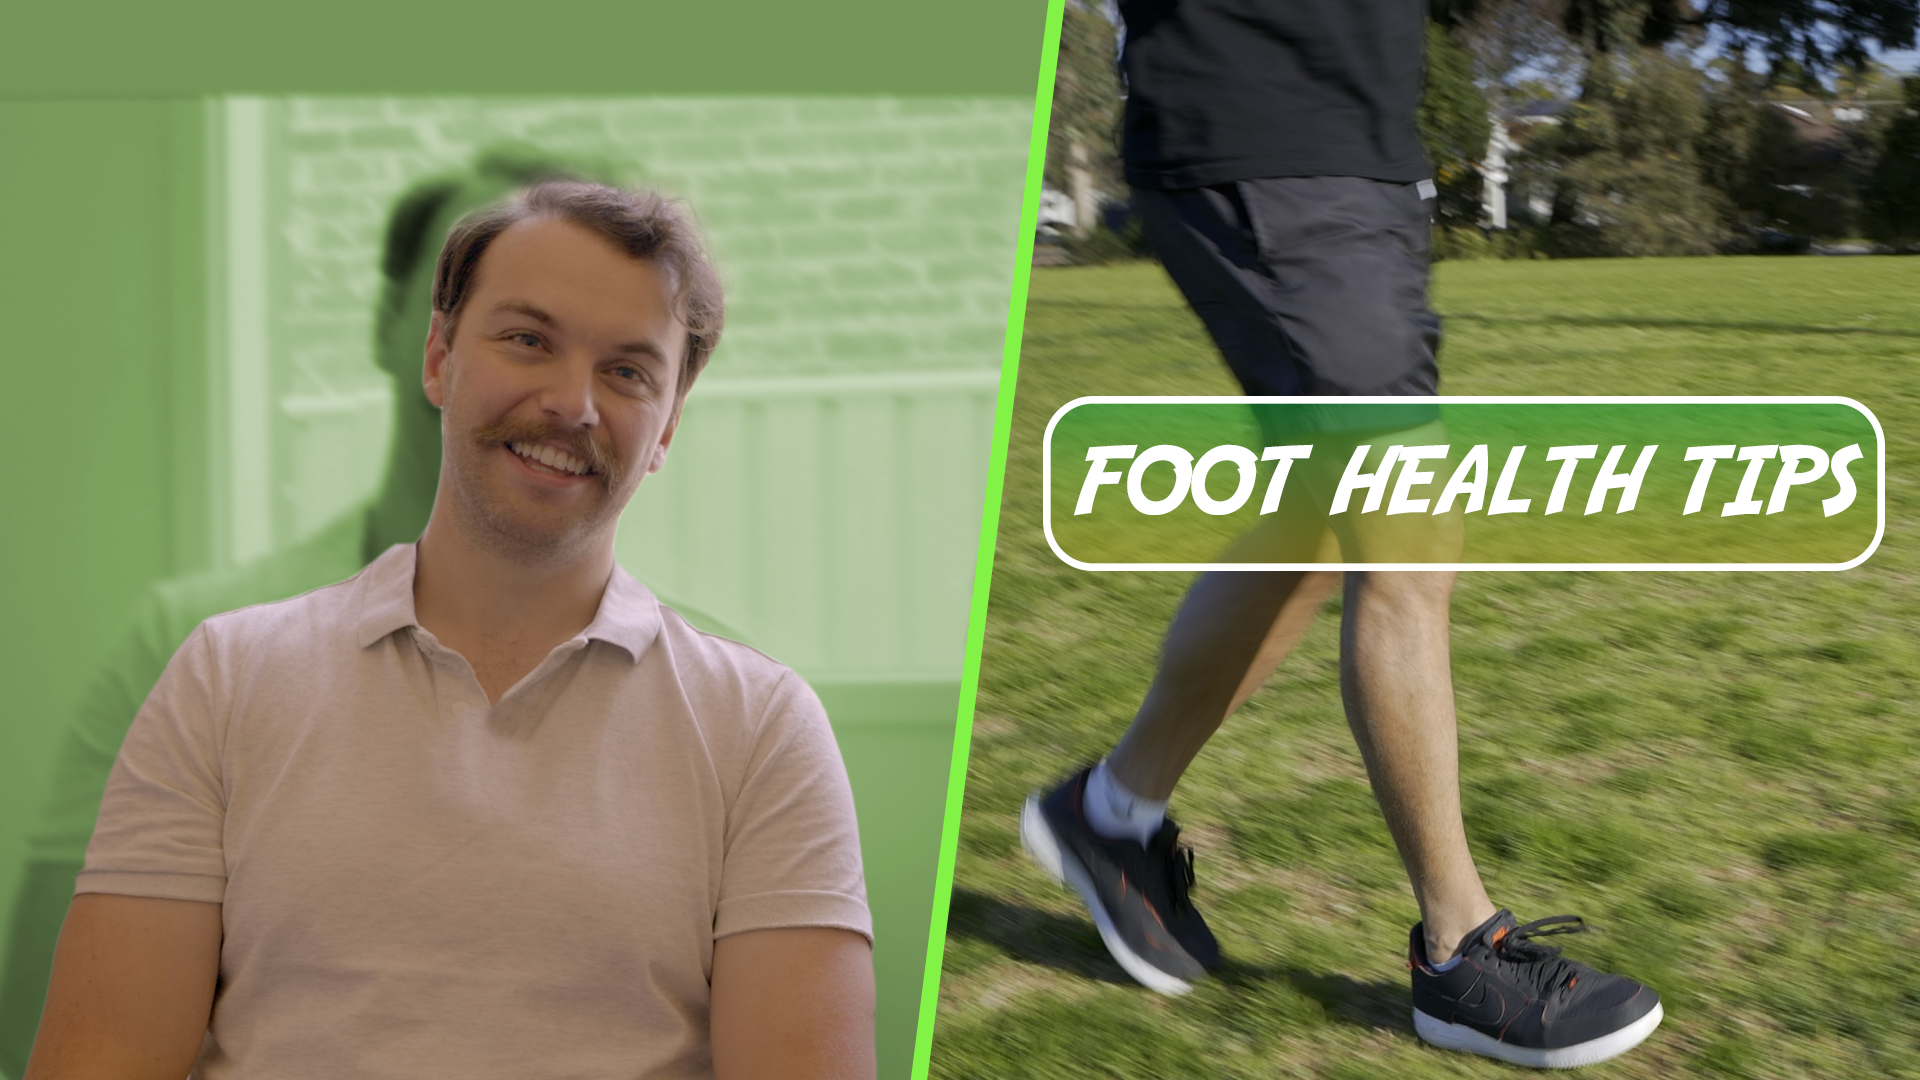 Podiatrist David Lee on Staying Healthy and Managing Injuries